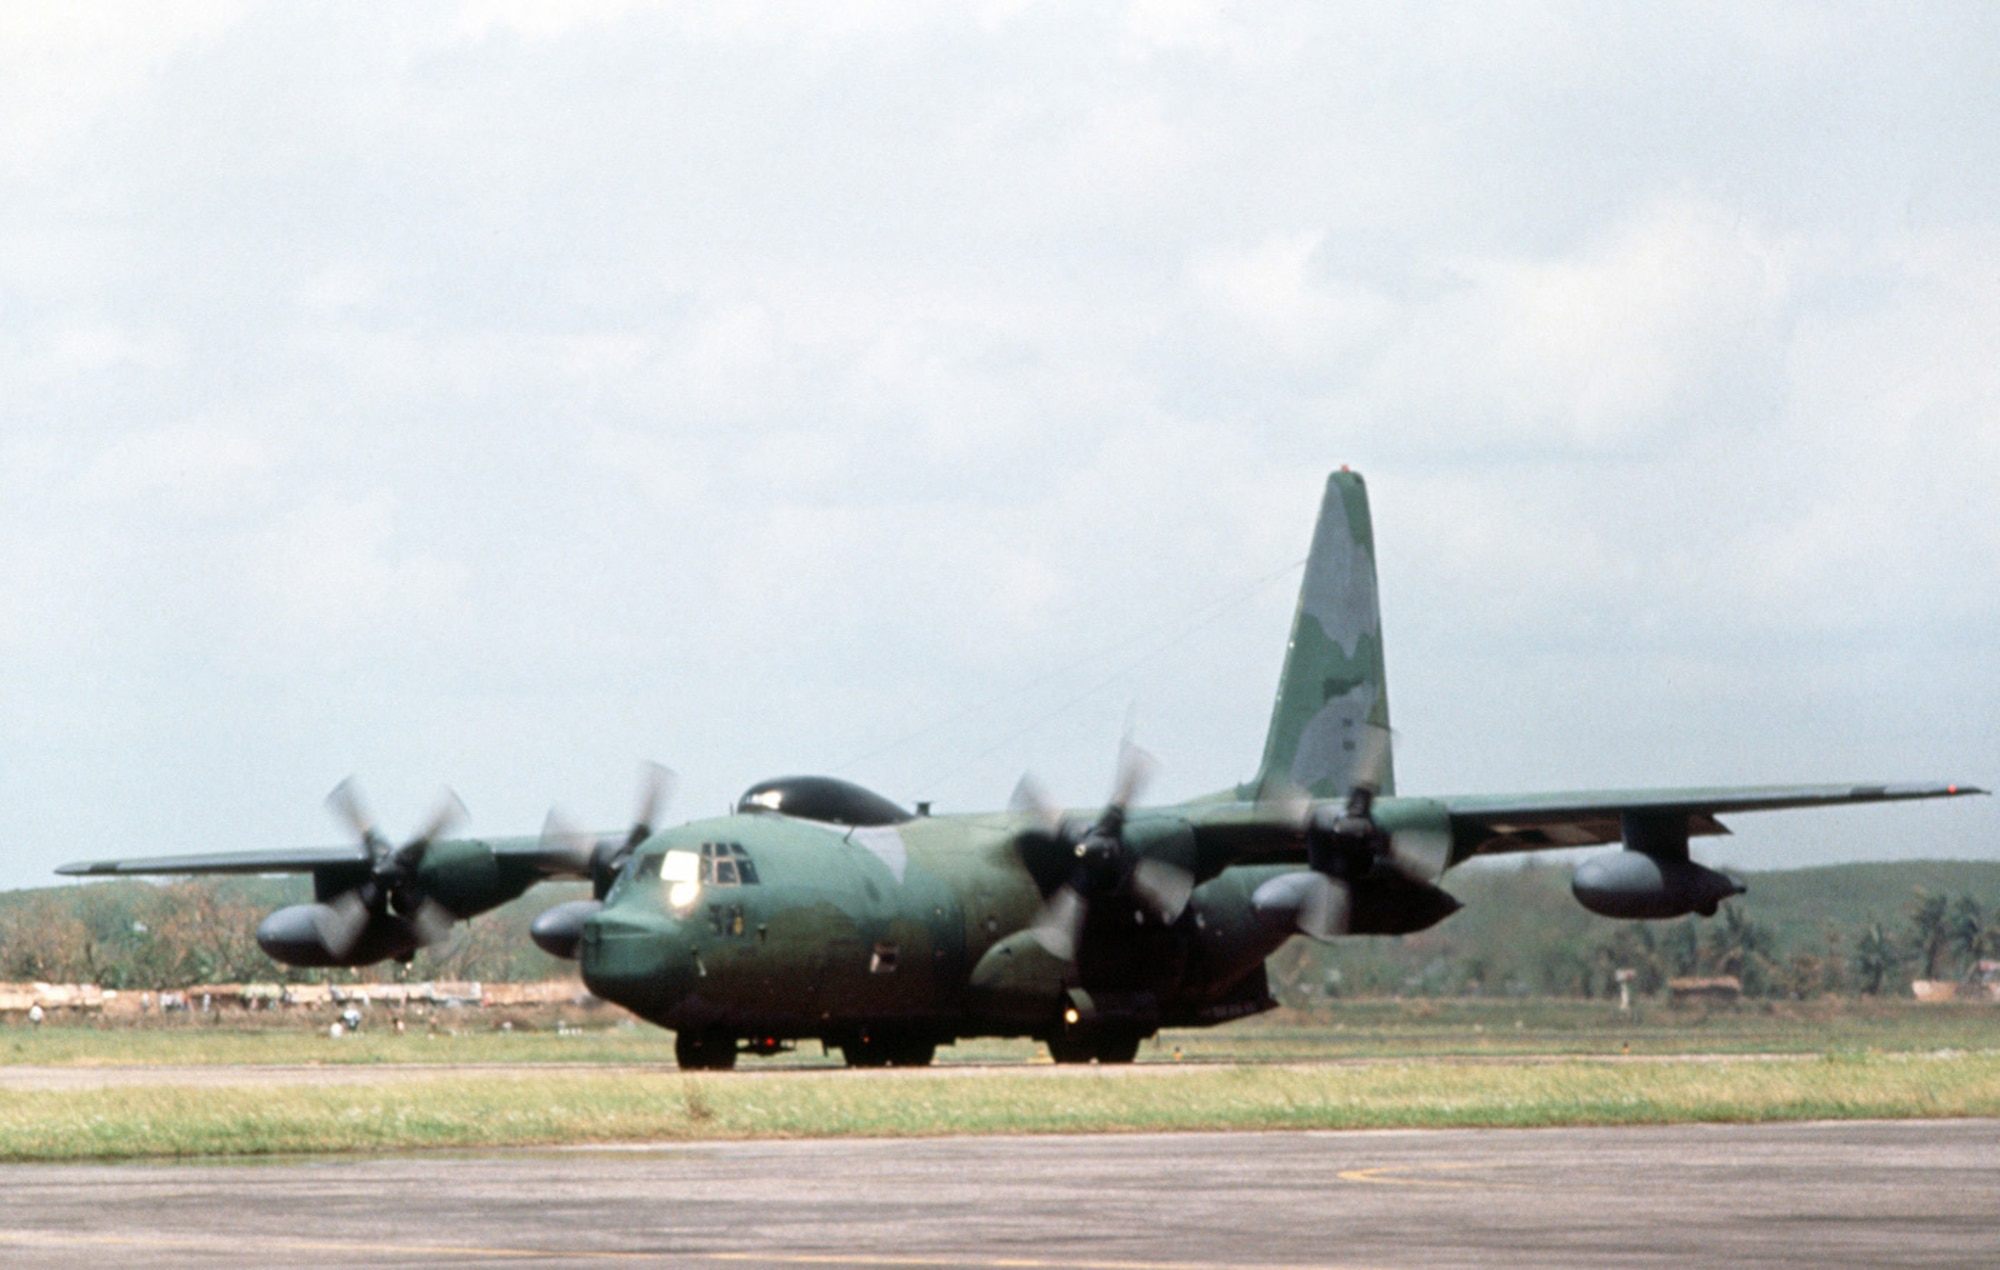 A 17th Special Operations Squadron HC-130 taxis on the runway at Chittagong Air Base April 30, 1991, after arriving to support disaster relief efforts as part of Operation SEA ANGEL after a cyclone devastated areas in Bangladesh. (U.S. Air Force photo by Staff Sgt. Val Gempis)